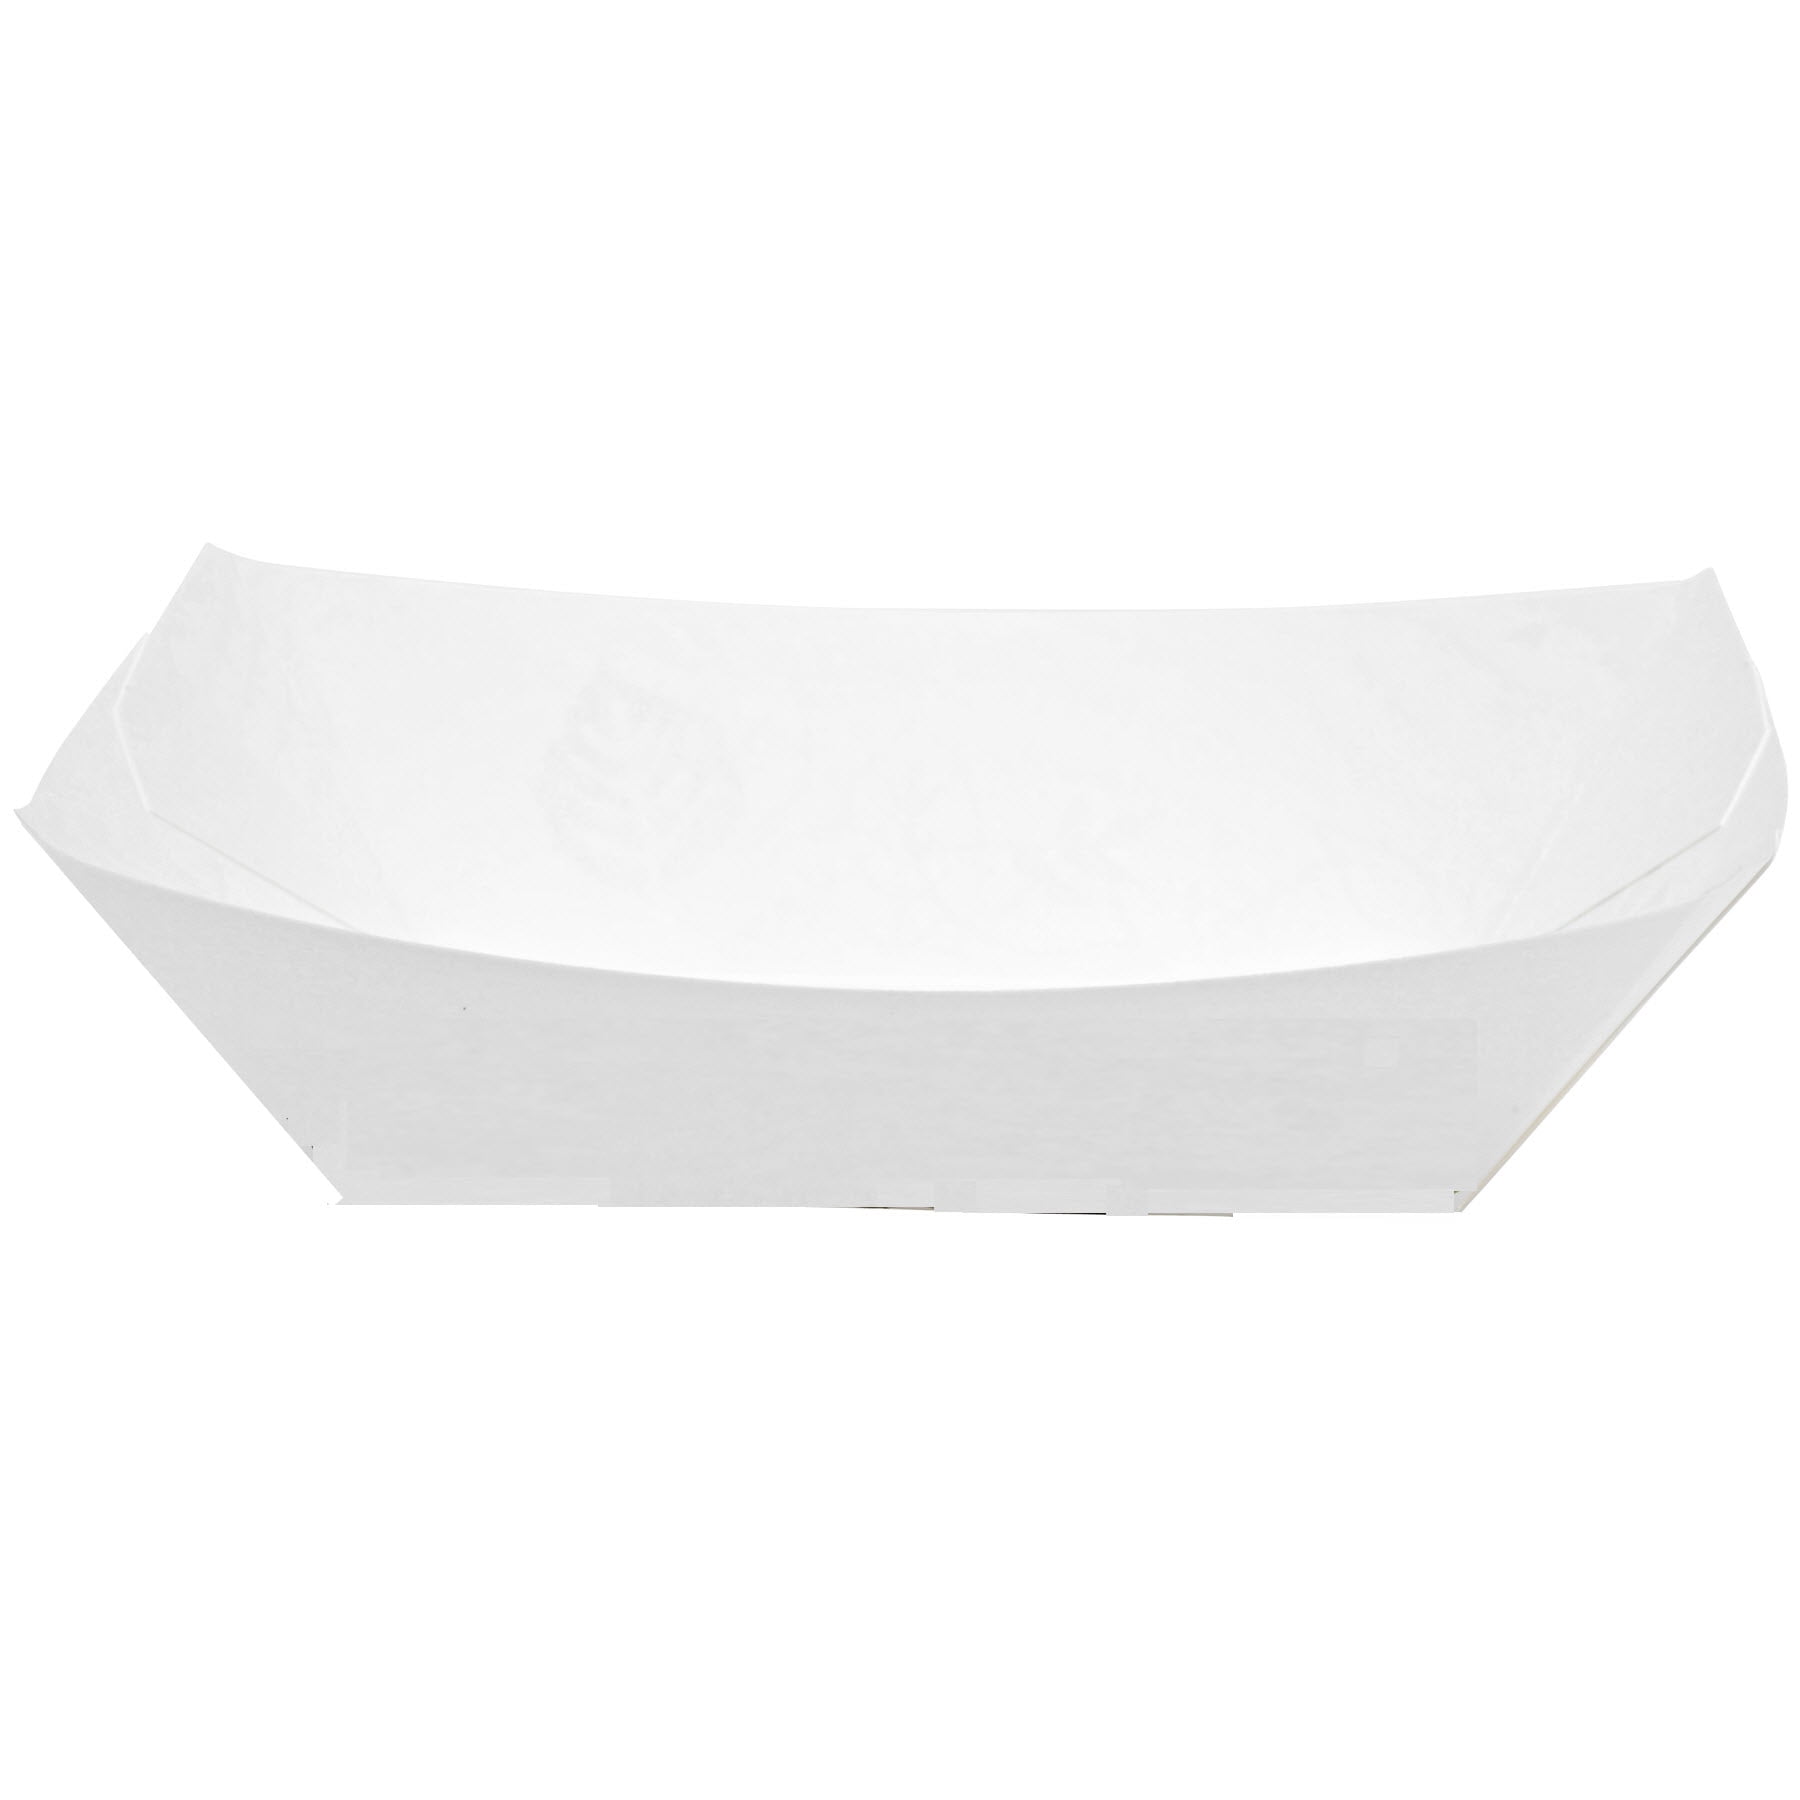 Small White Growing Tray - DoughMate®